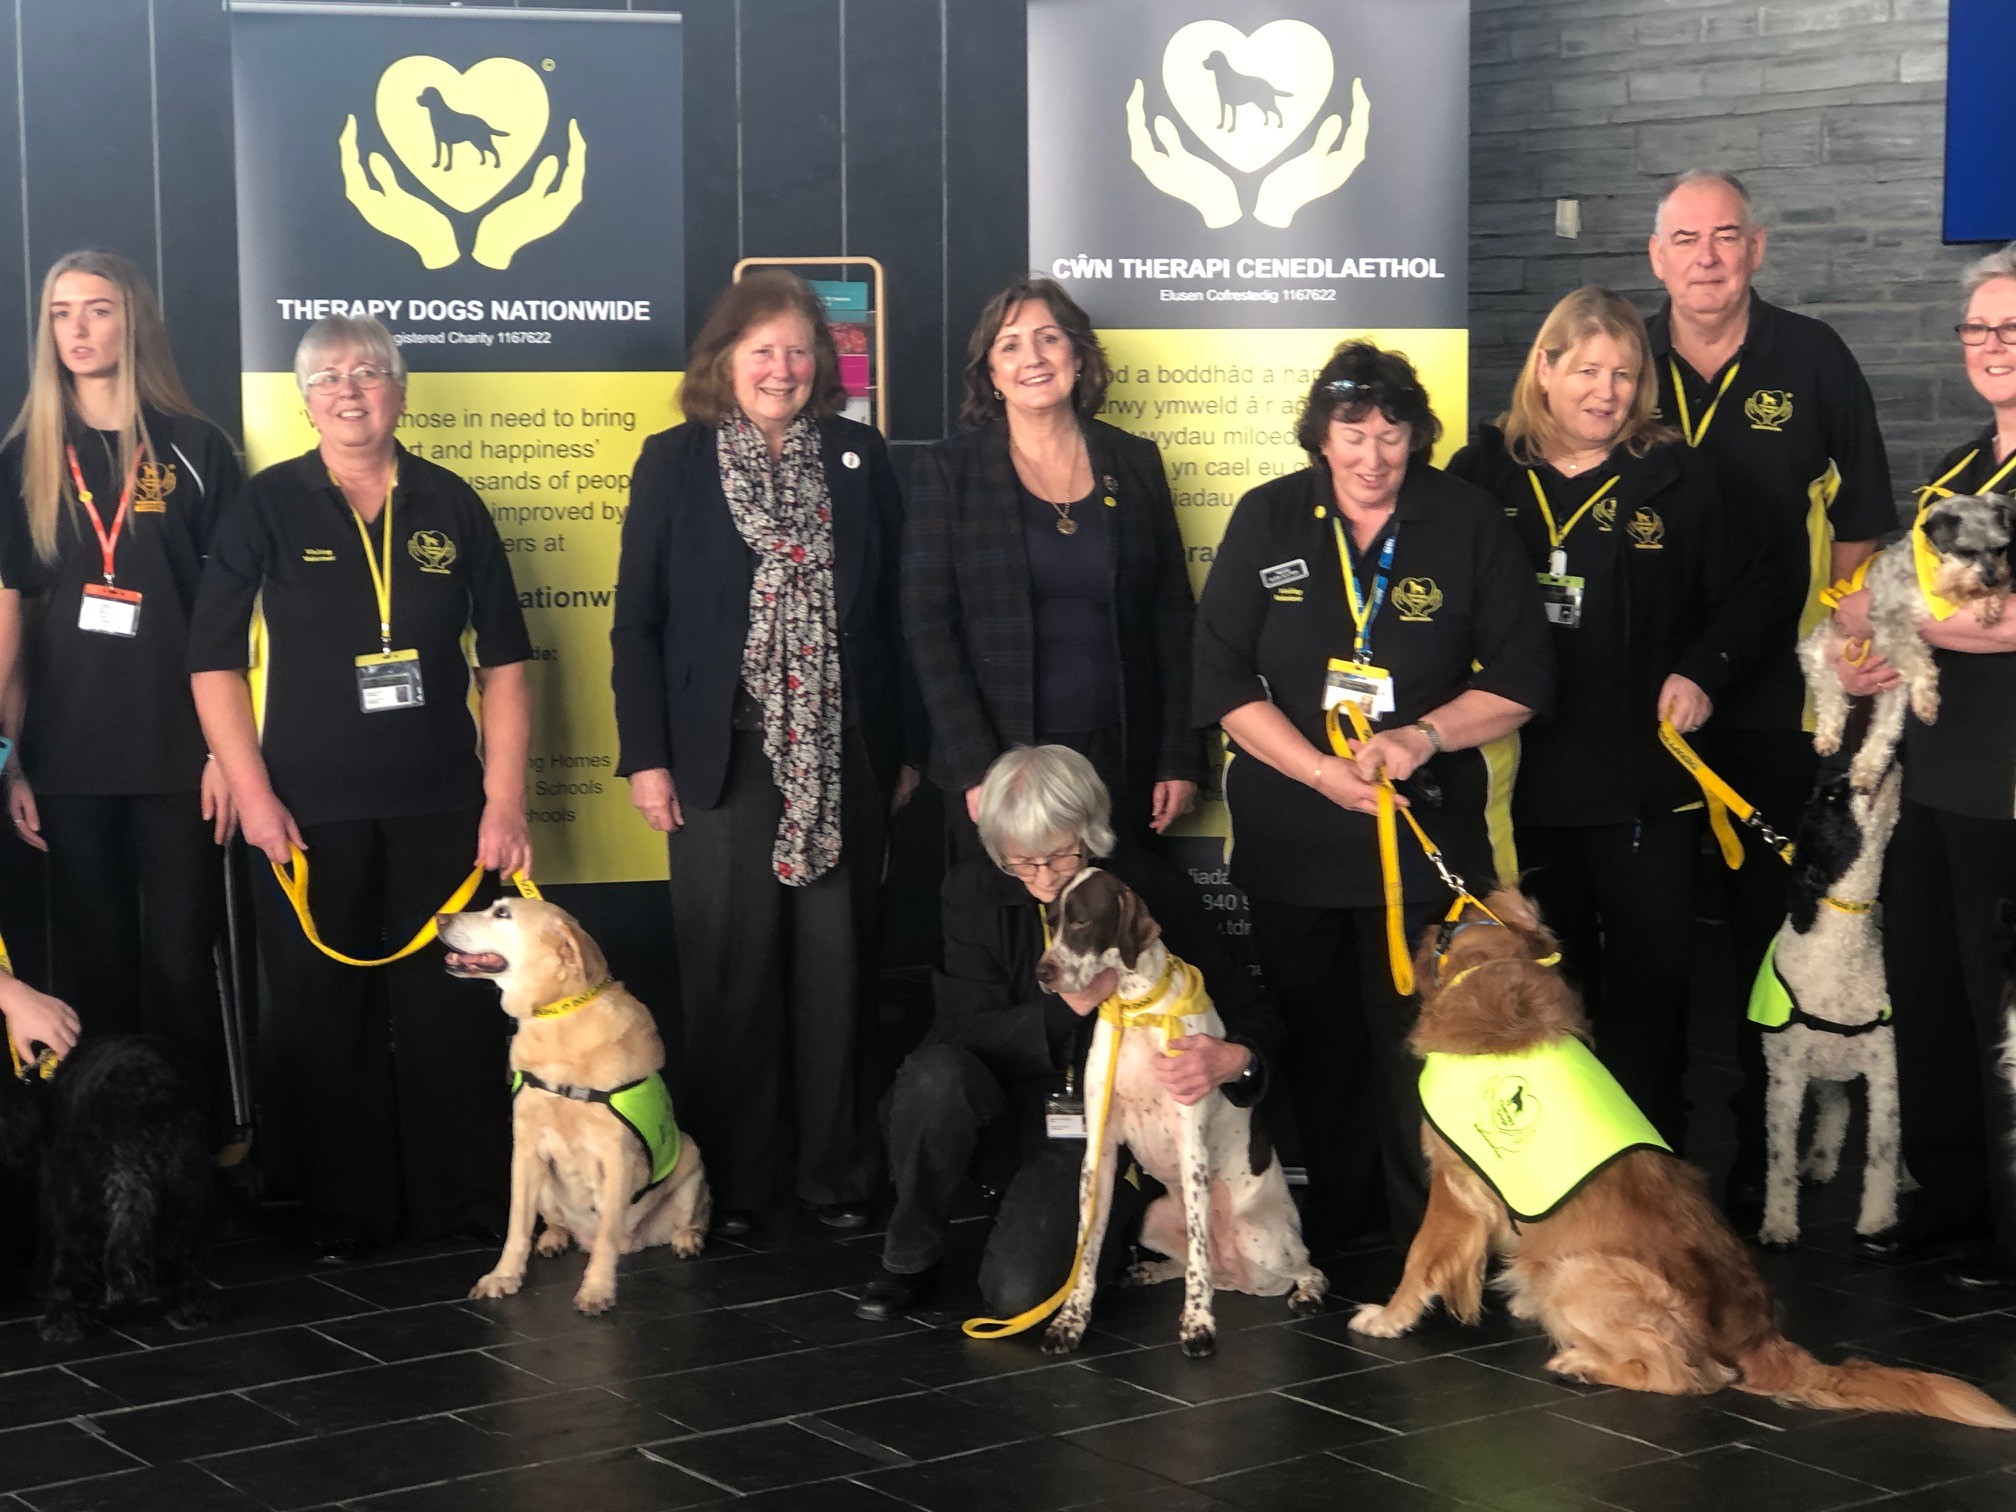 Shadow Welsh Minister for Social Care Hosts Therapy Dogs